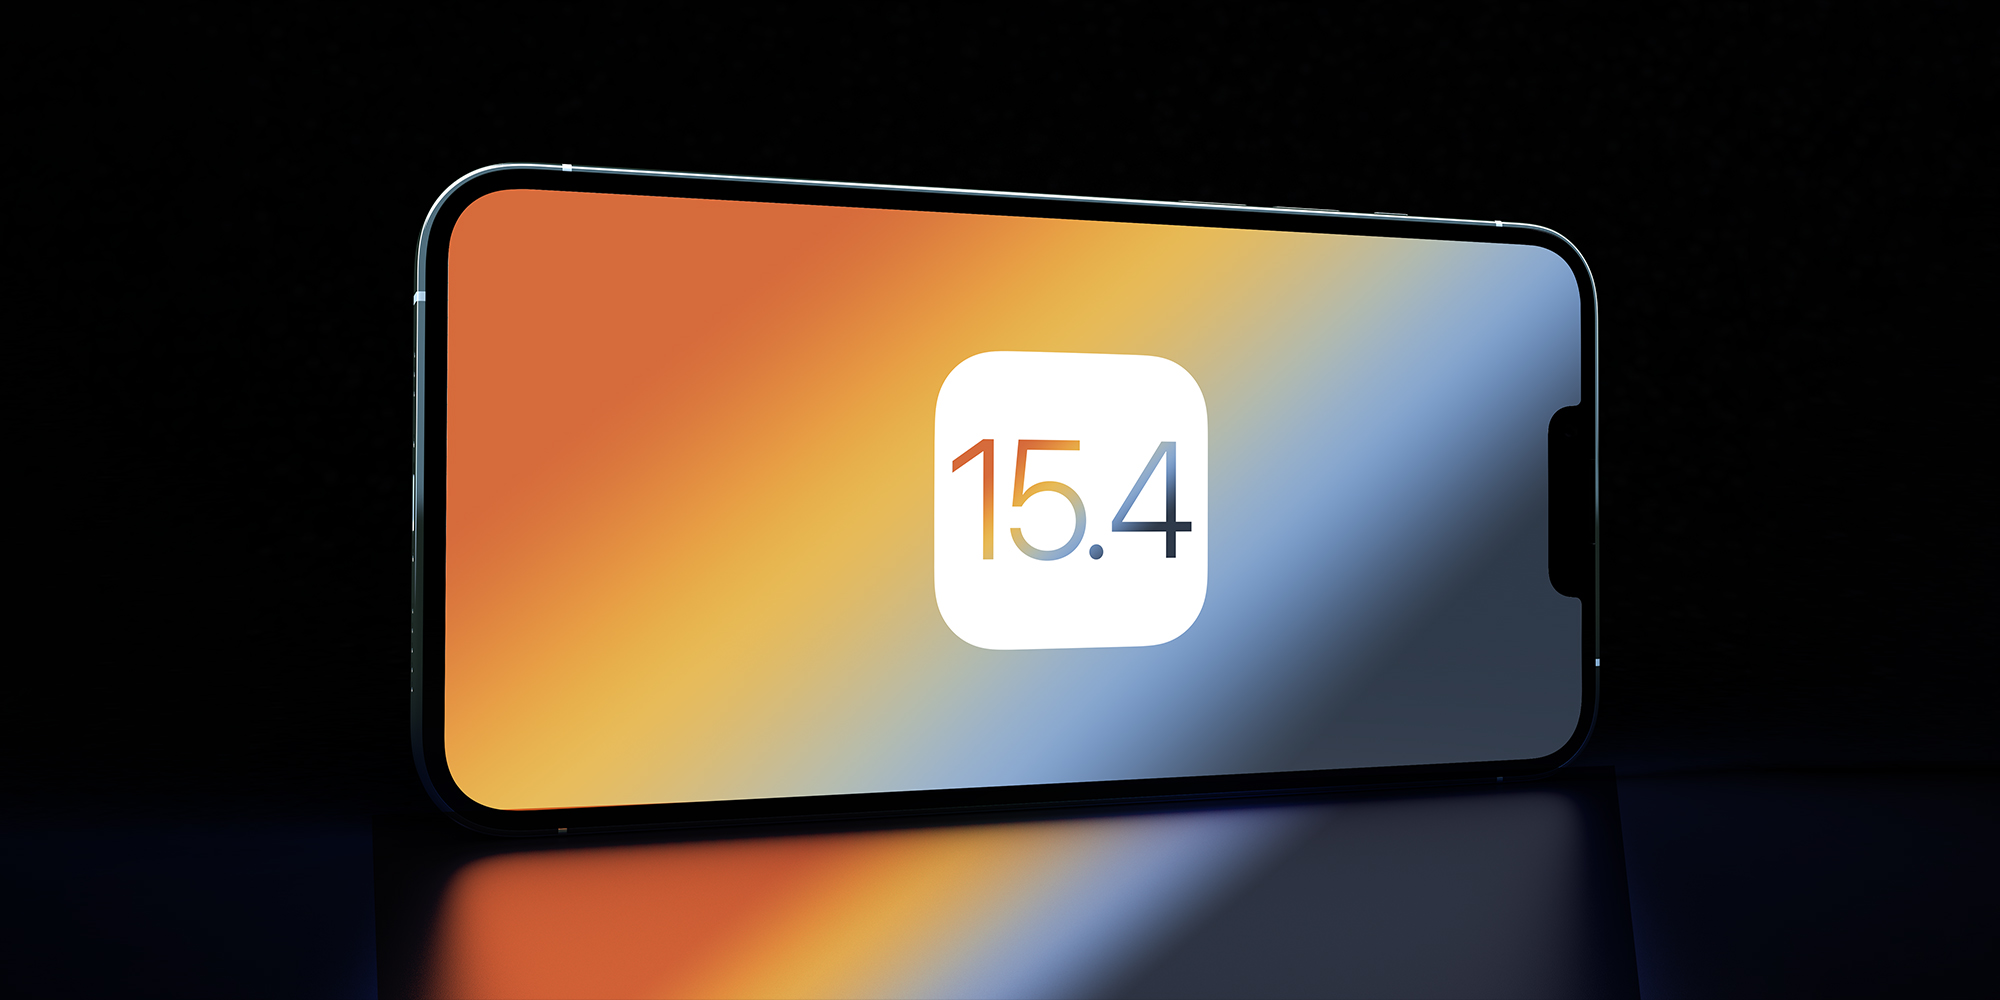 Here's what's new in iOS 15.4 and iPadOS 15.4 - 9to5Mac